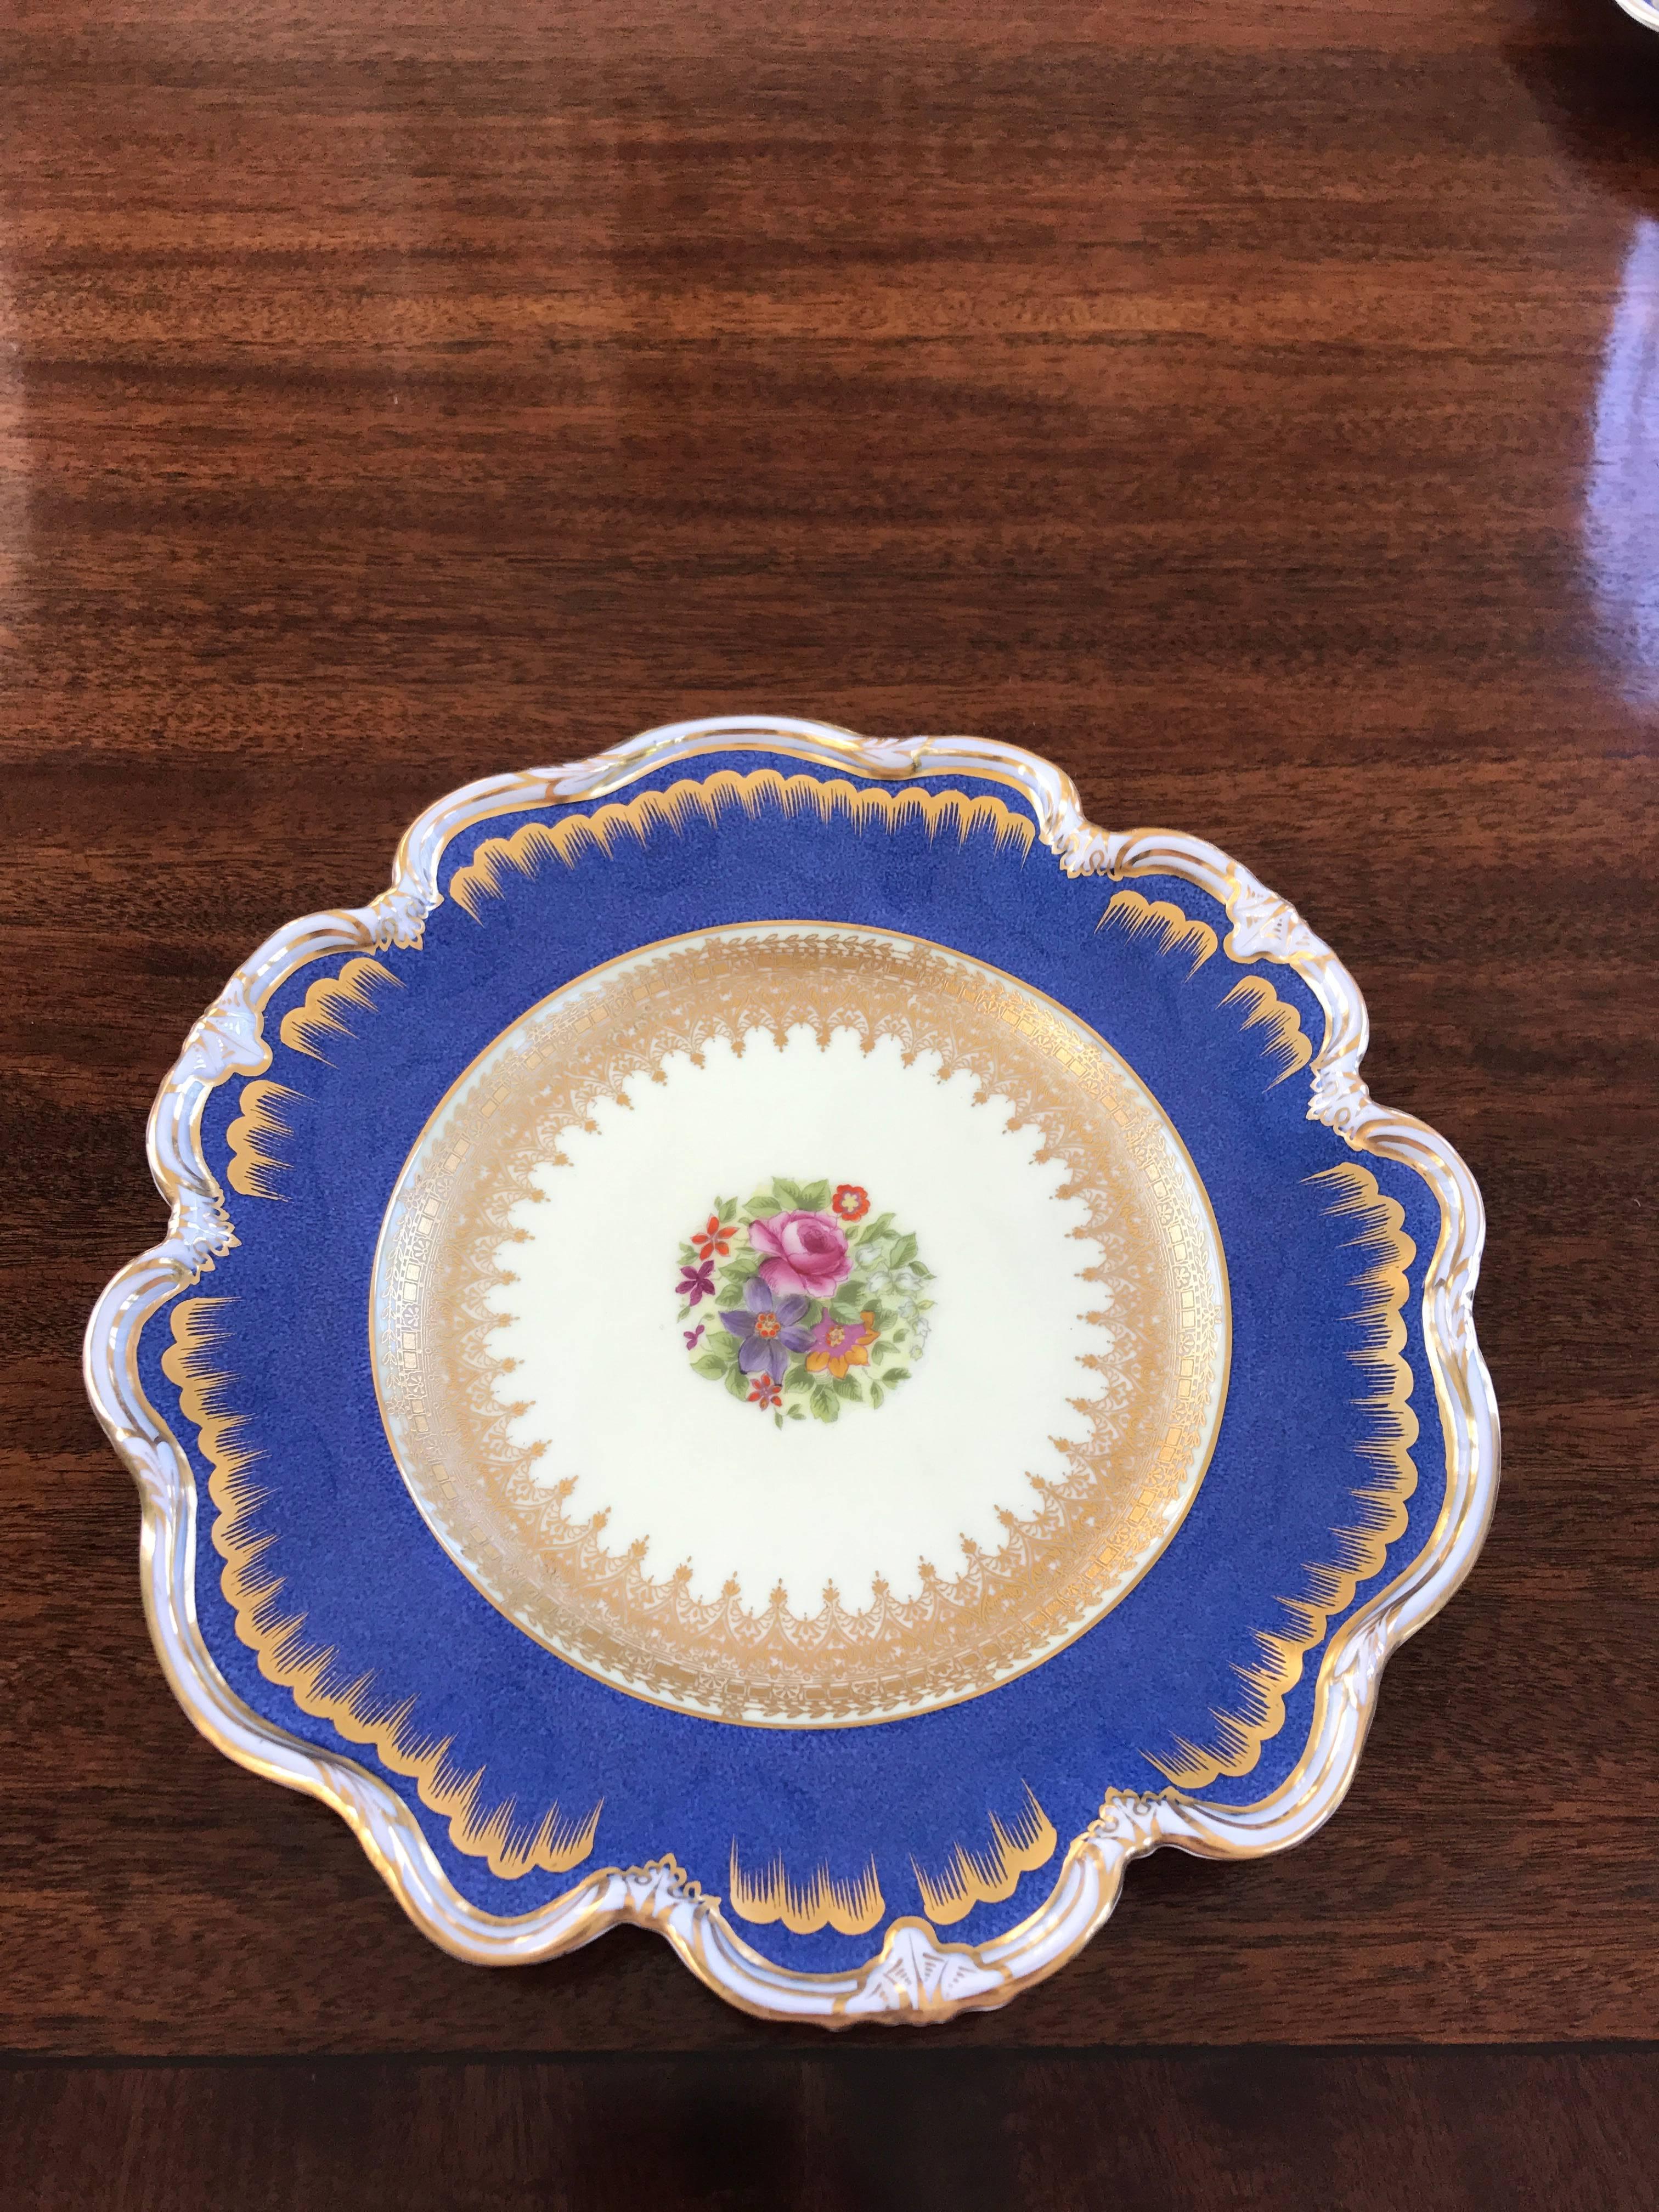 A lovely set of ten scalloped porcelain plates, each with a 24-karat gold trim and a broad cobalt blue border. 
The center is adorned with a hand painted bouqet of flowers on an ivory background. 
Made in England
George Jones & Sons.
Circa 1900
